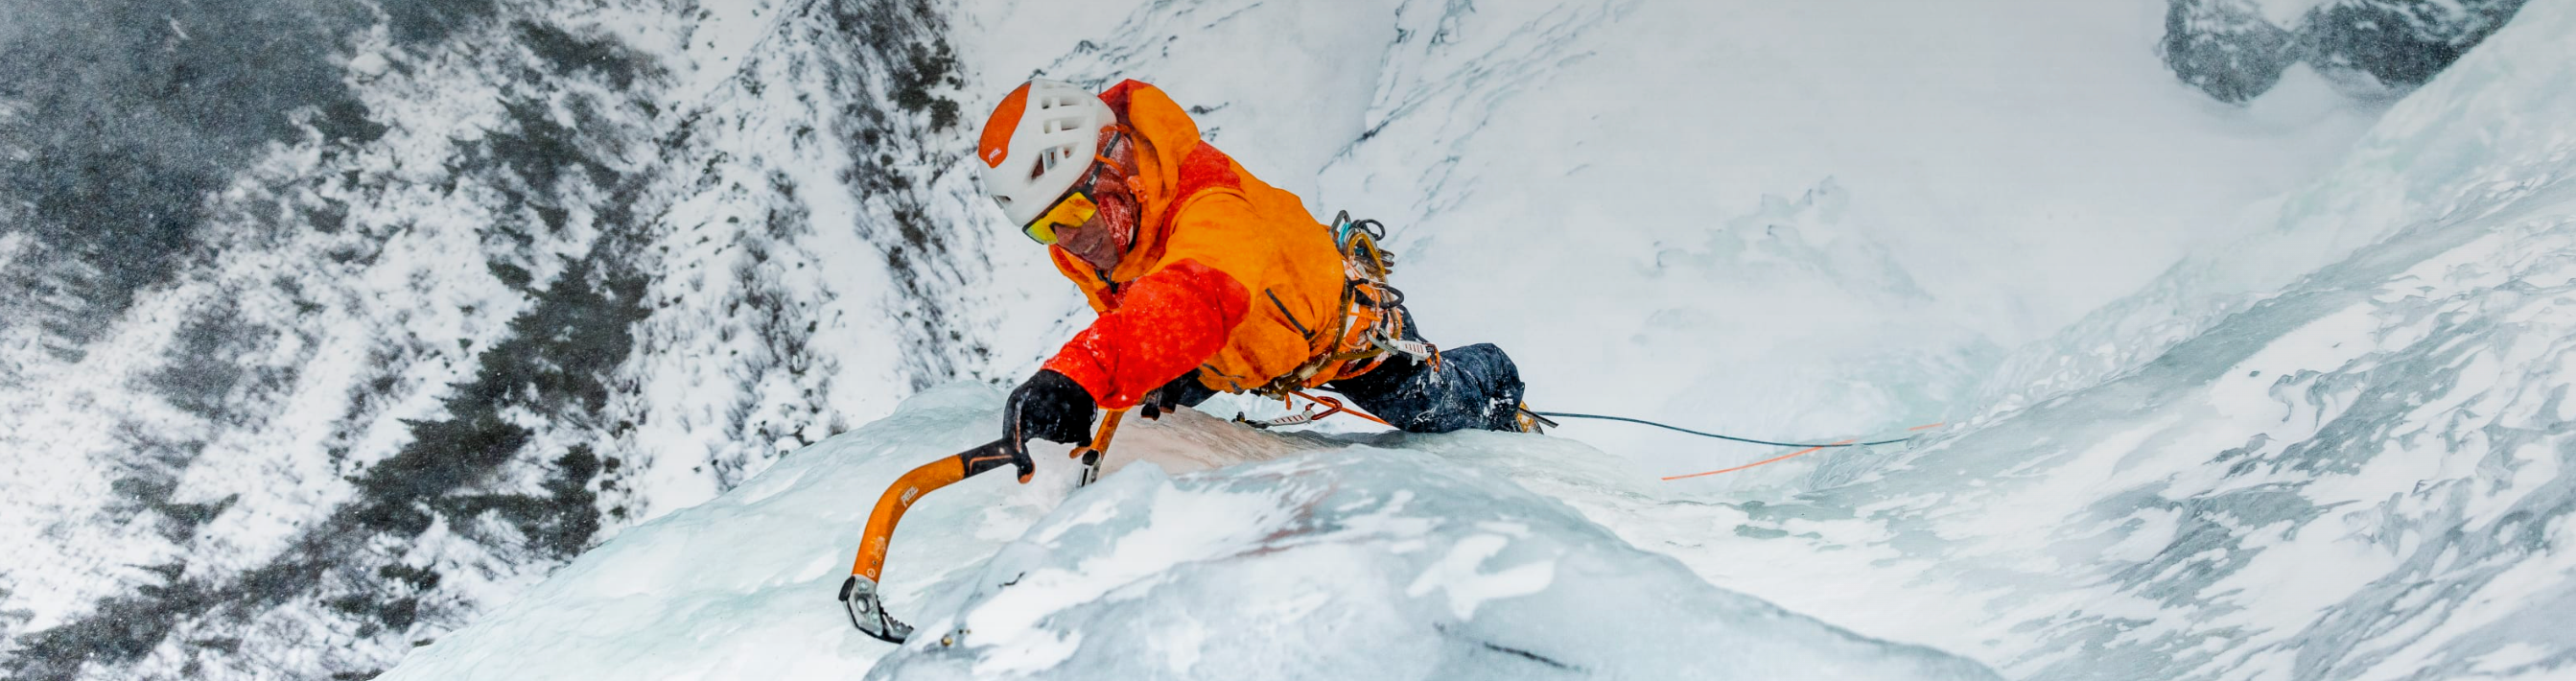 A person ice climbing in Norrona clothing and outerwear